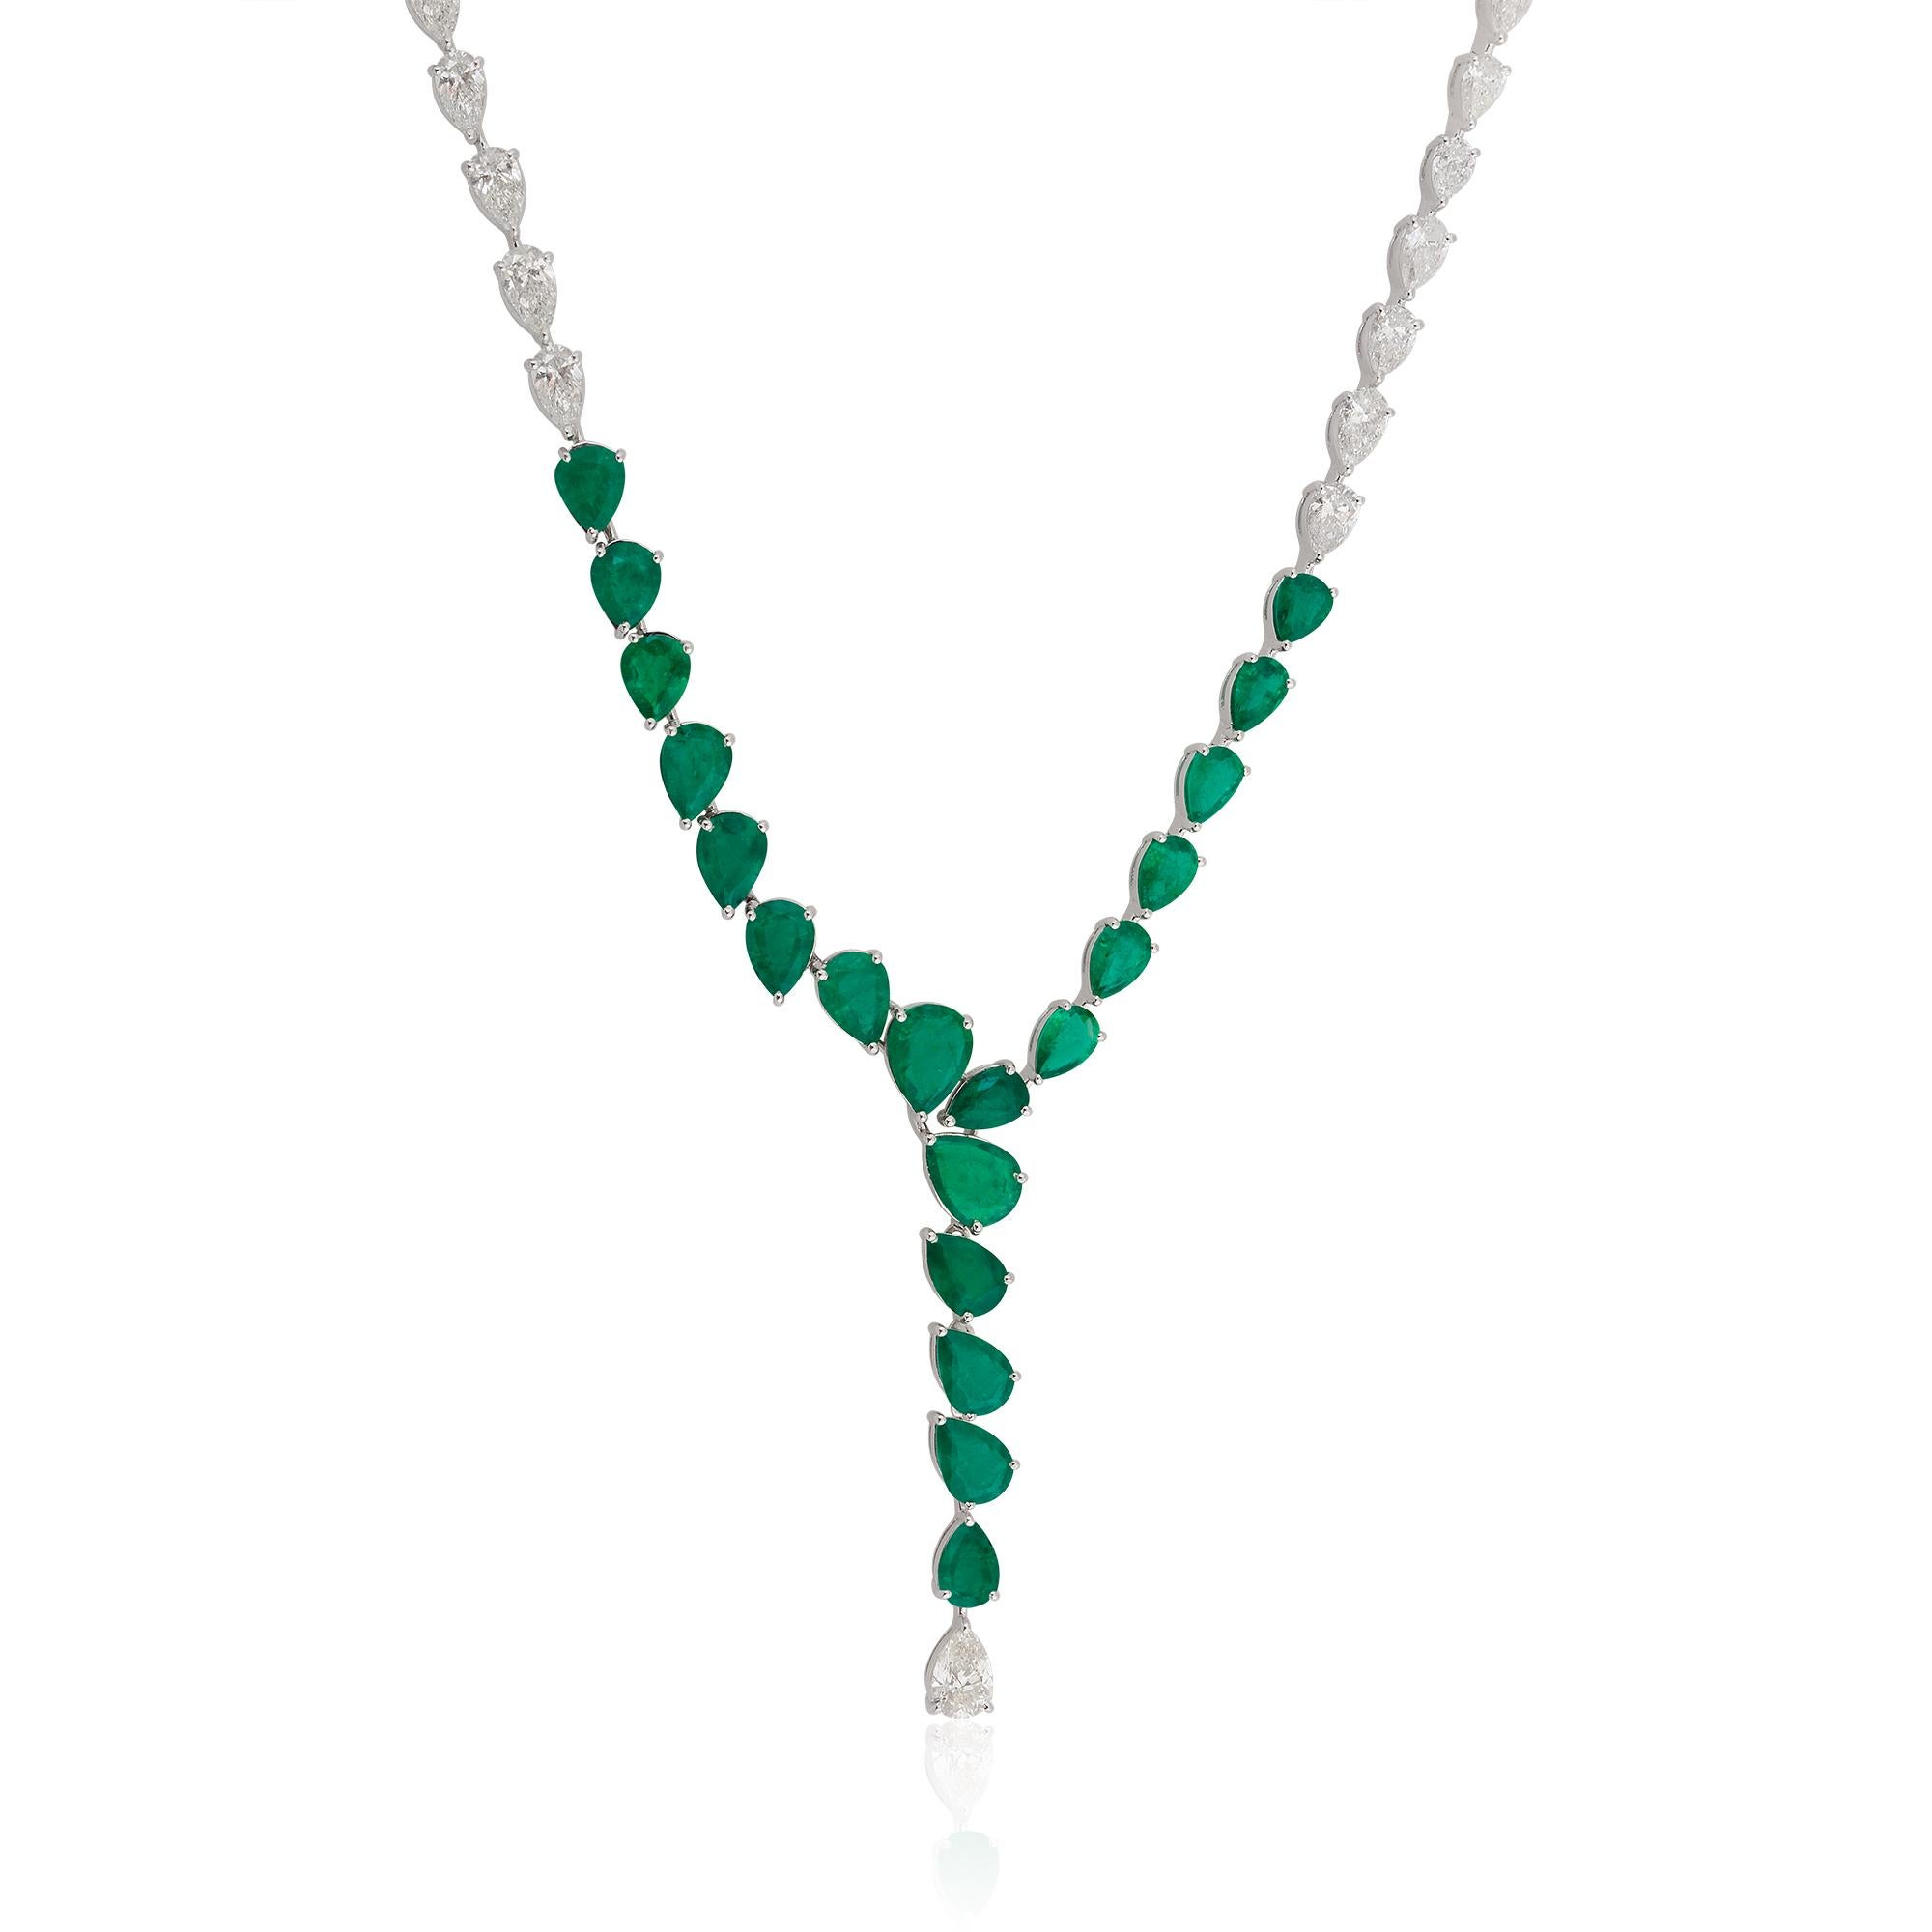 A necklace featuring a pear-shaped Zambian emerald gemstone and diamonds in 18 karat white gold is a stunning and luxurious piece of fine jewelry. The necklace typically showcases a single pear-shaped Zambian emerald as the centerpiece, accented by